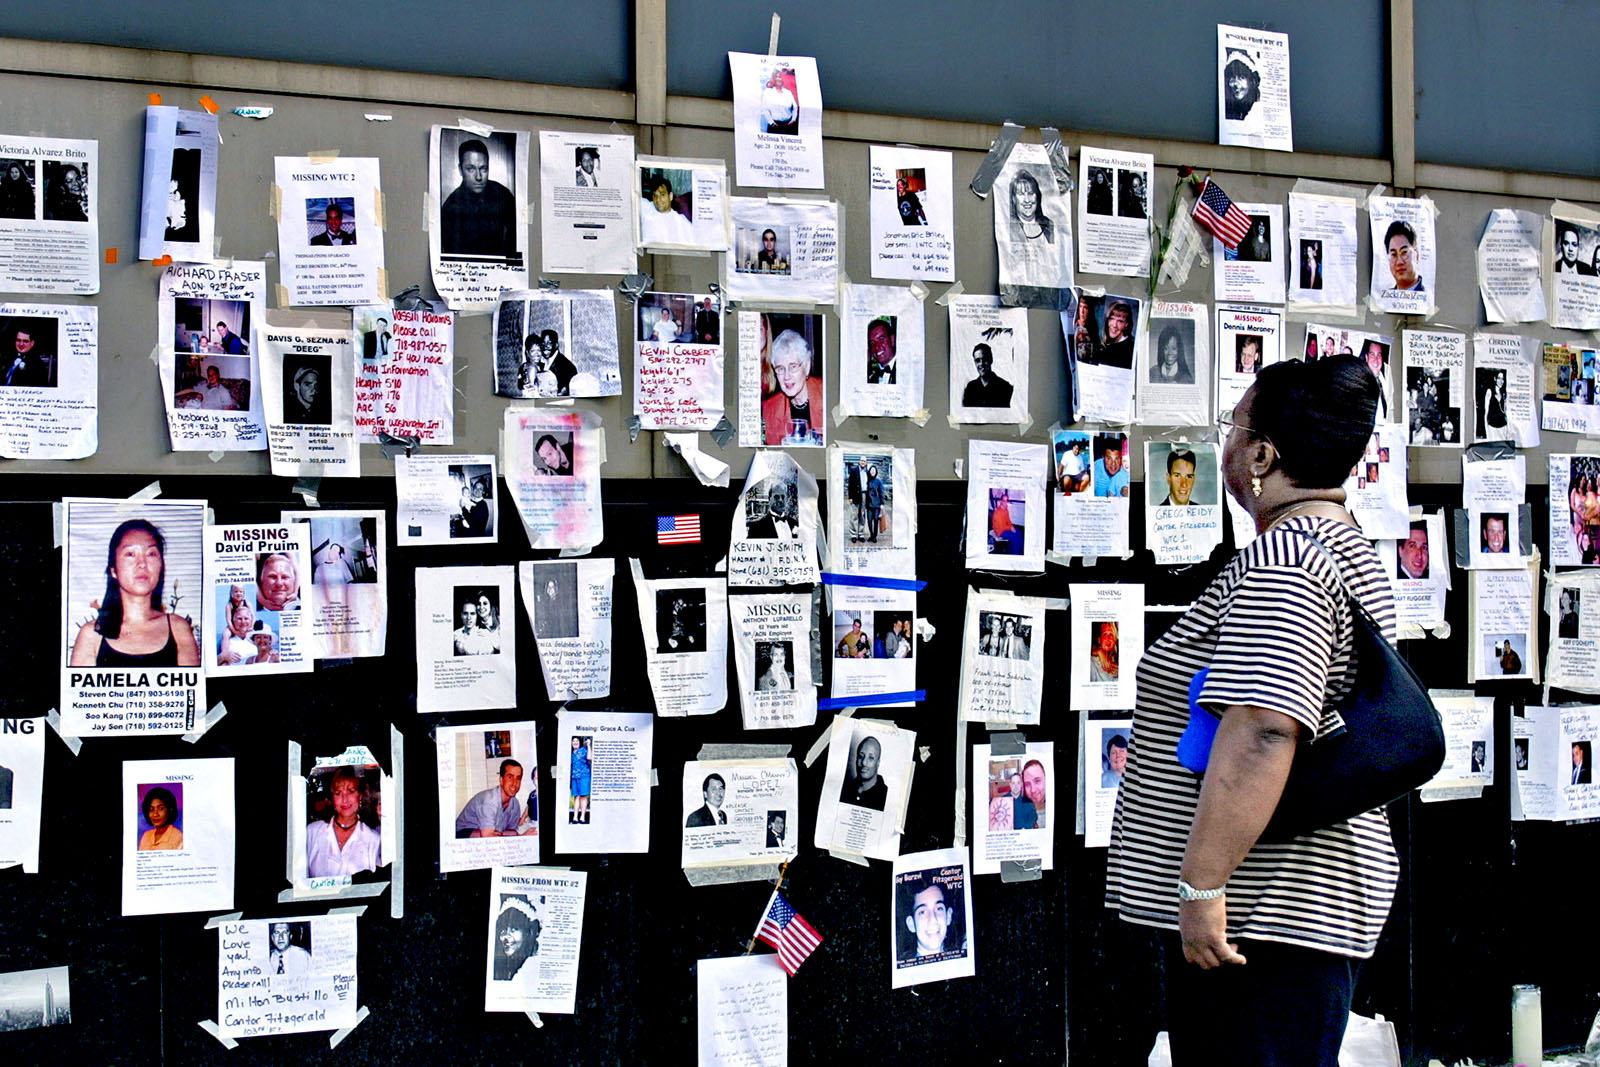 Notes of missing people could be seen all over Manhattan after 9/11.